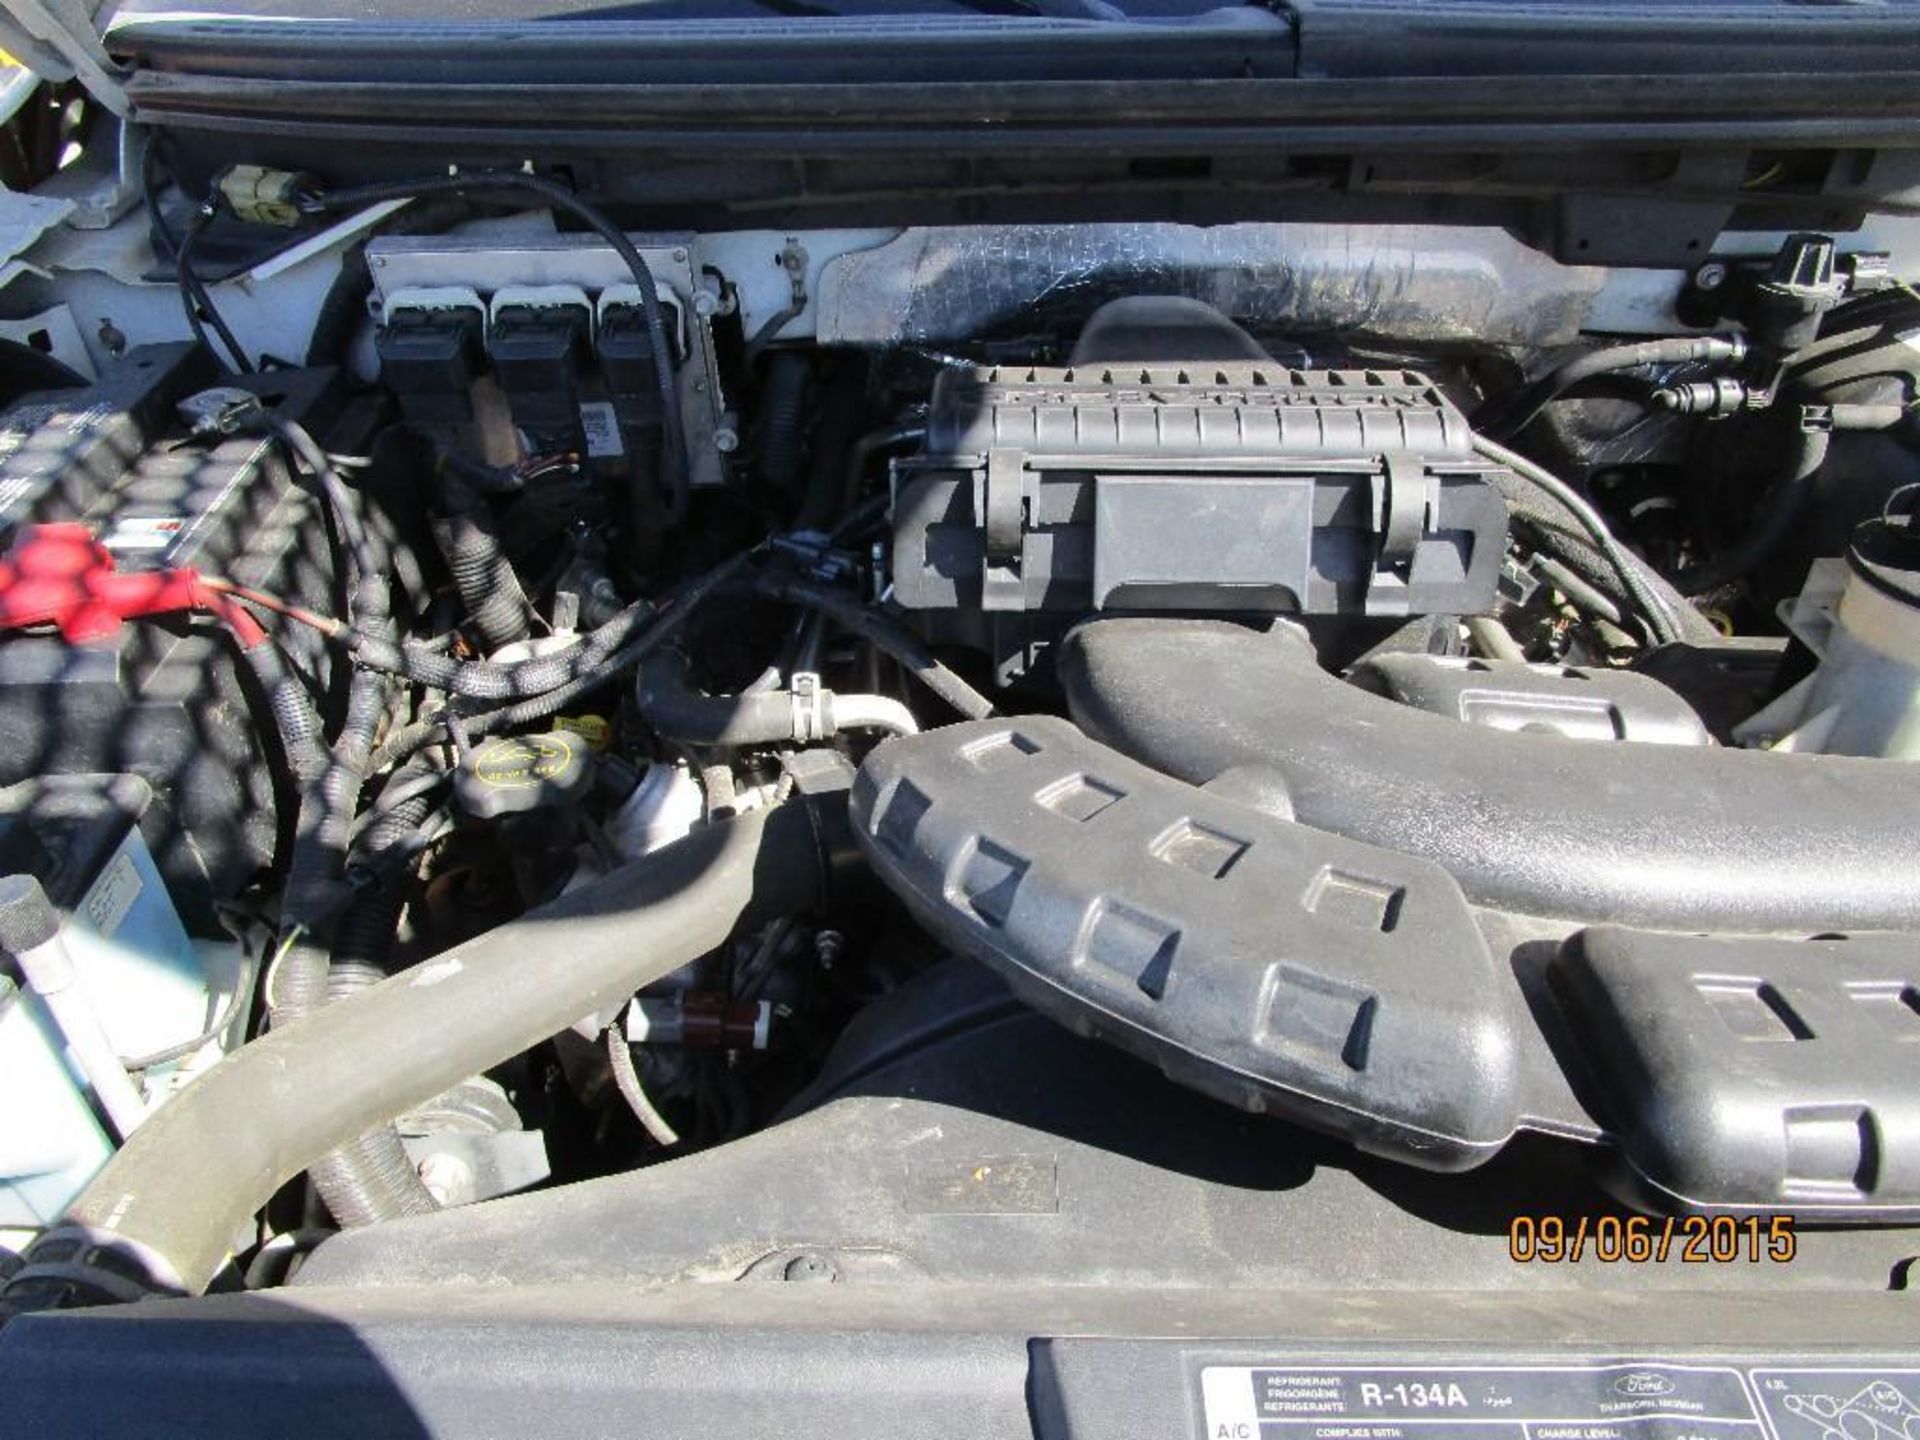 VIN 1FTPX12547KC73028 LIC# 94069R1 P/W P/L  Cold A/c Recently replaced spark plugs and coil boots - Image 6 of 15